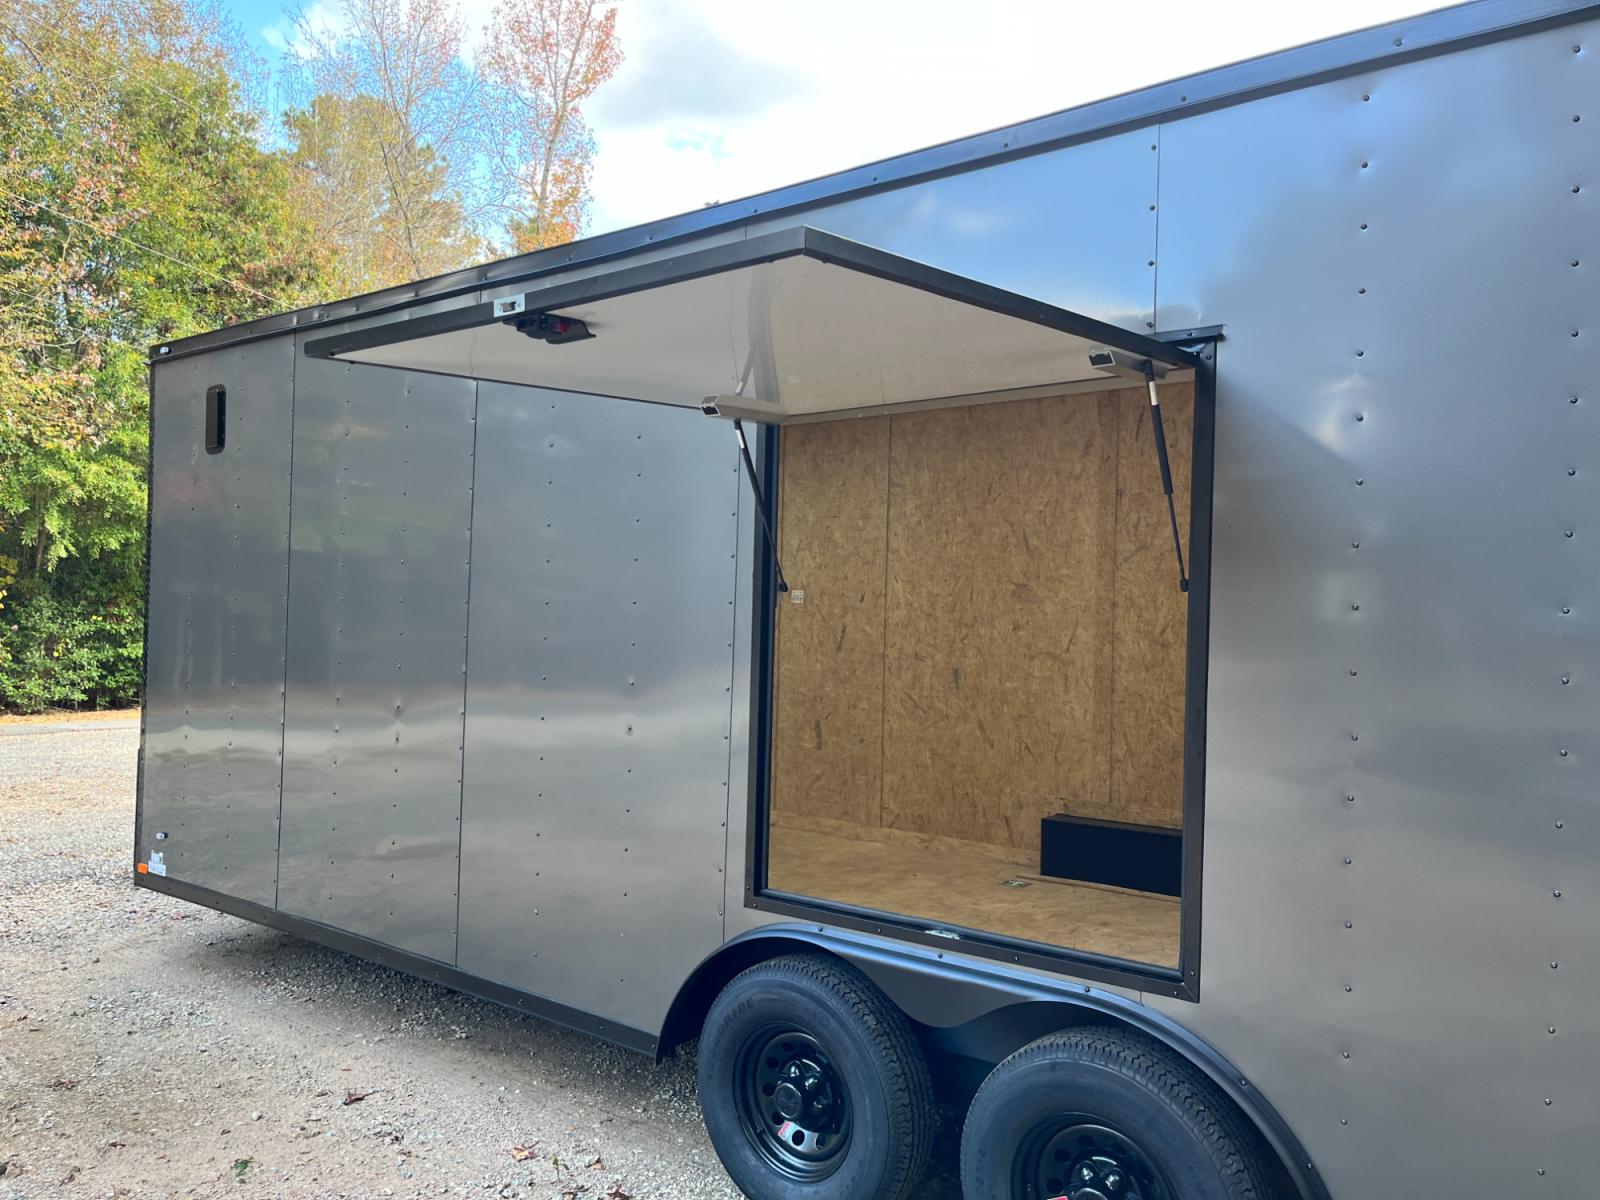 2023 .080 Charcoal Metallic w/Black Out Pkg. Elite Cargo 8.5ft X 24ft Tandem , located at 1330 Rainey Rd., Macon, 31220, (478) 960-1044, 32.845638, -83.778687 - Brand New 2023 Model Elite Cargo Trailer, Made Tifton, GA 7ft 4" Tall Inside Height, Air Conditioner, Insulated too! 15,500 BTU A/C Unit, 5 Inside LED Light Strips! Lights Up Really Bright Inside! This Deluxe Enclosed Car Hauler has Awesome Features! .080 Thick Charcoal Metallic Skin! Stunning - Photo #6